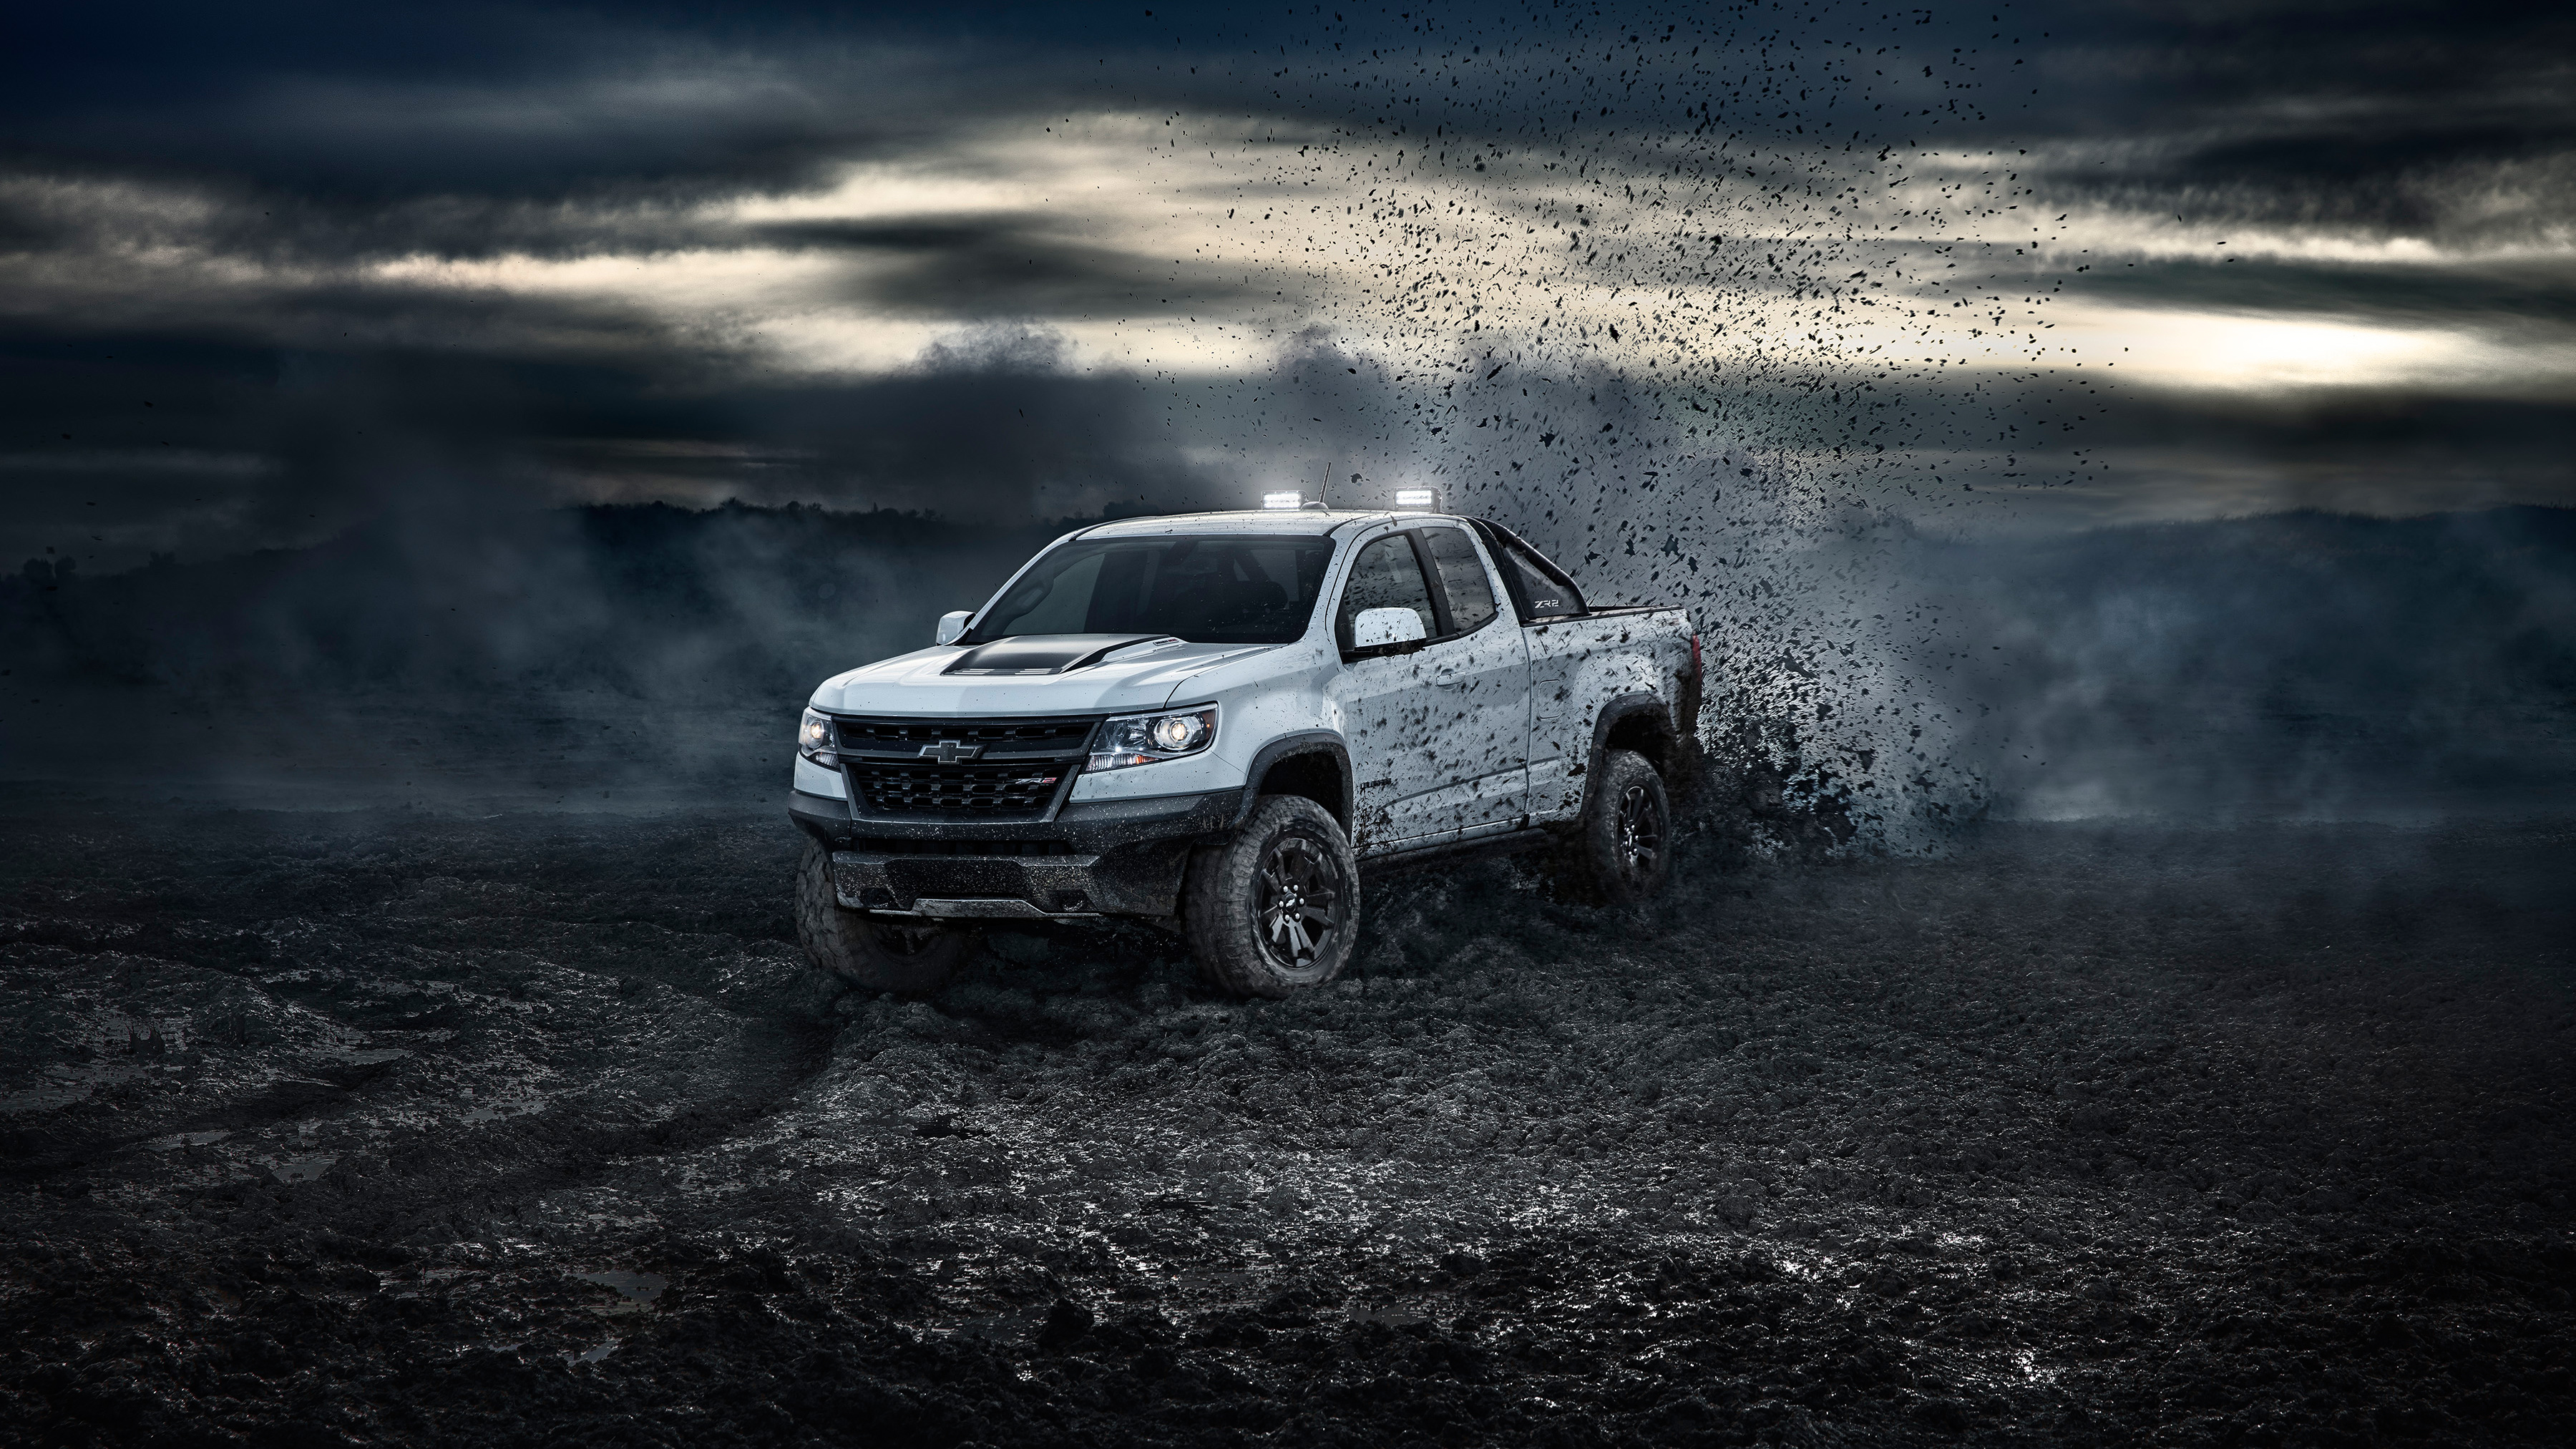 Chevrolet Colorado Wallpapers and Background Images   stmednet 3600x2025